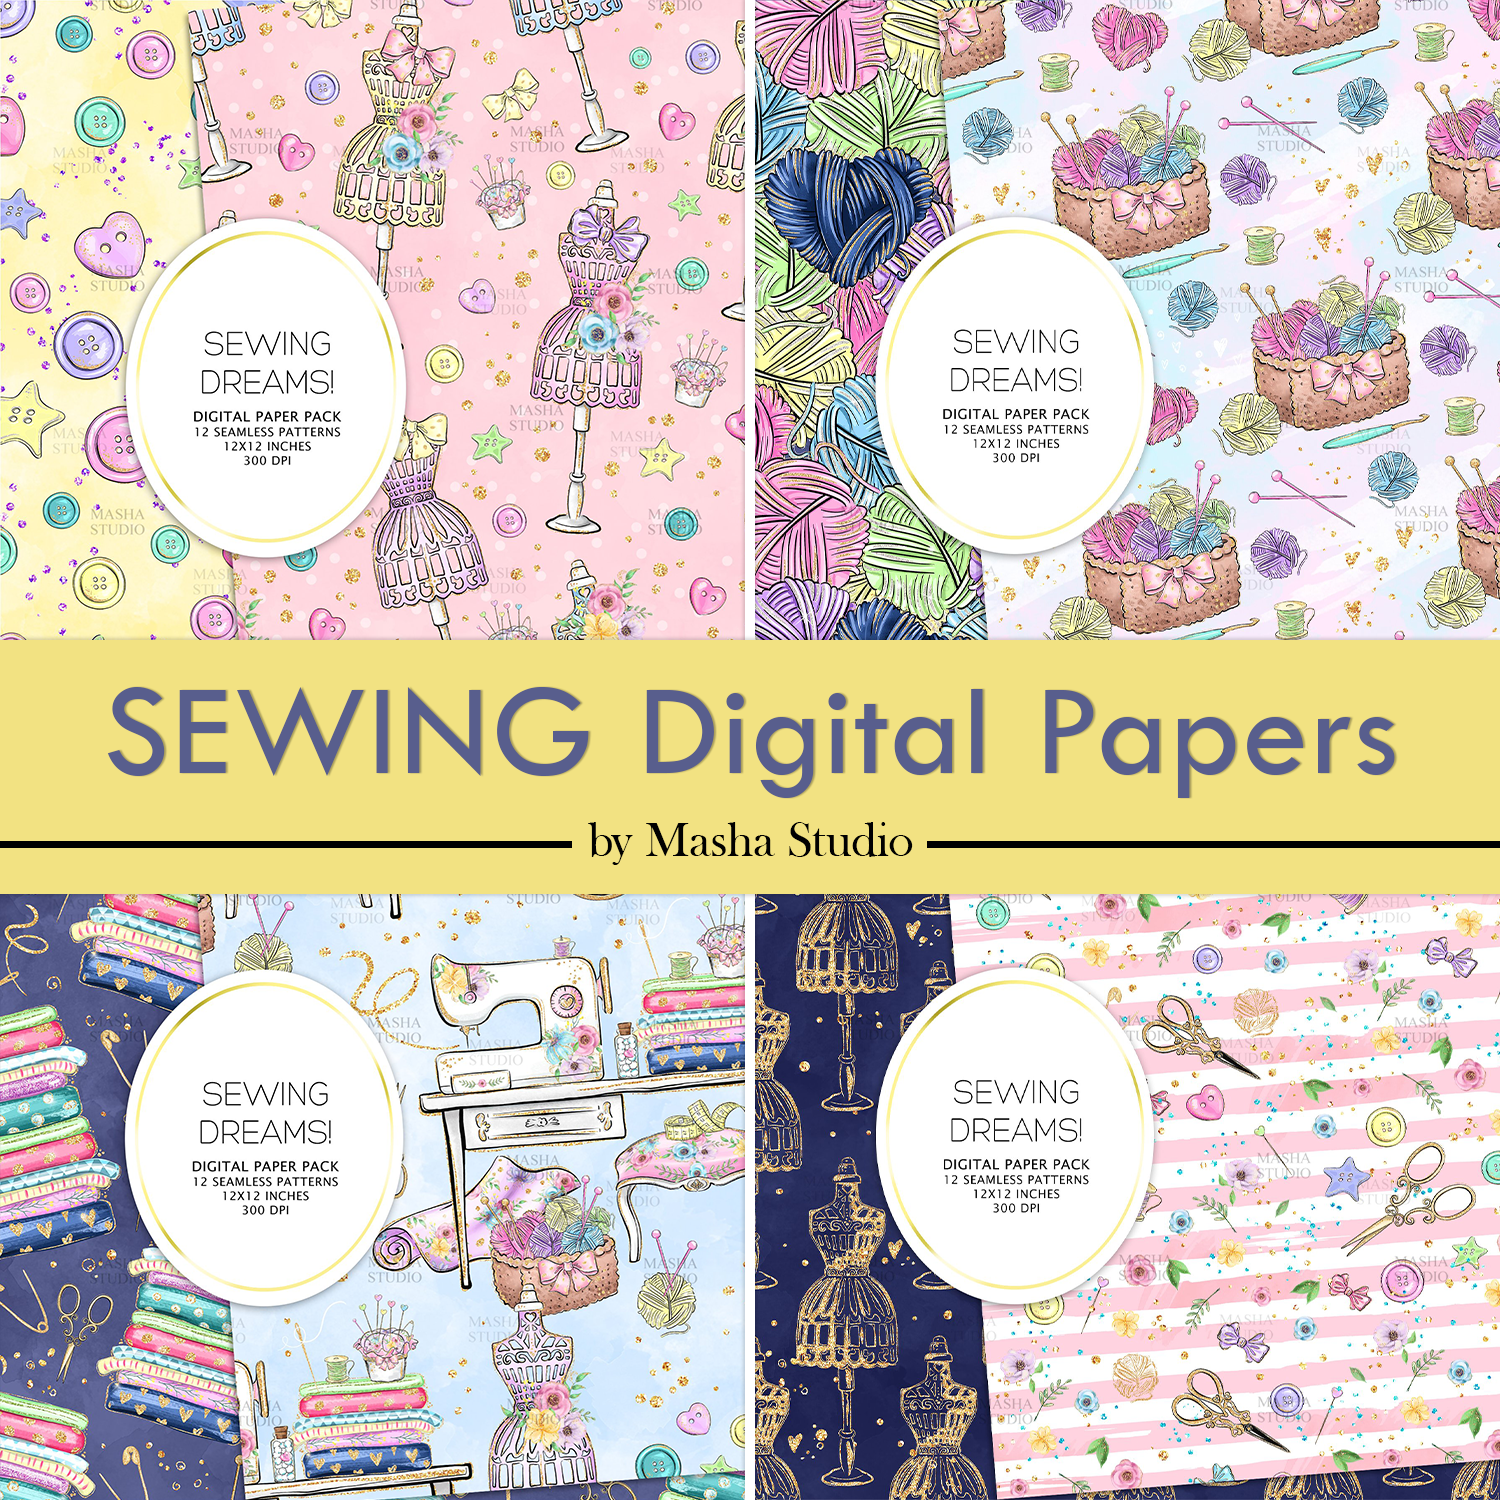 Preview of images on the topic of sewing and other topics.